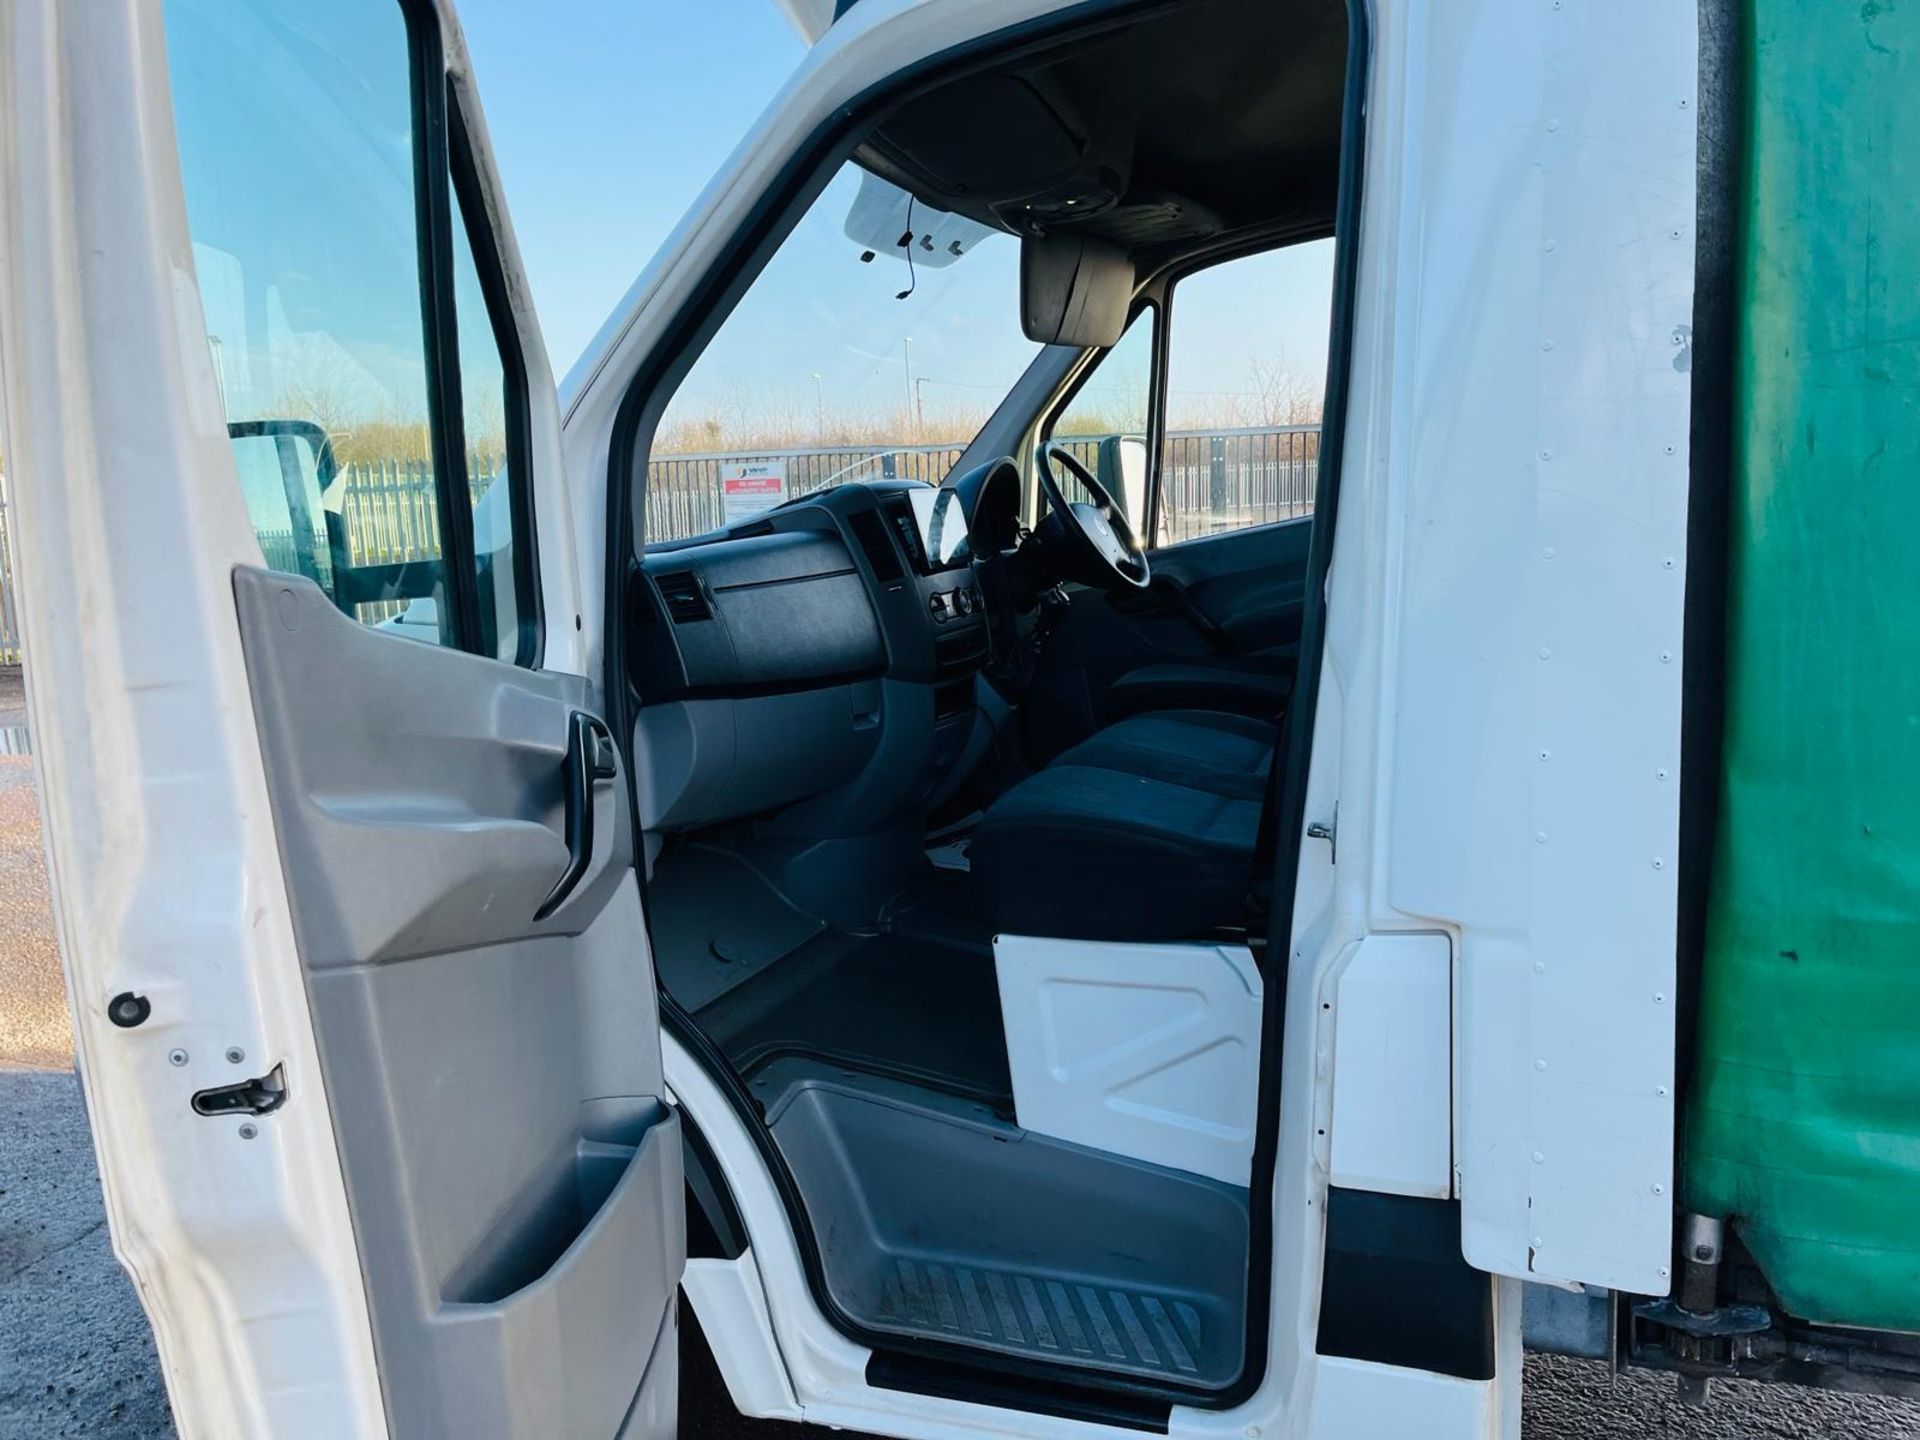 Volkswagen Crafter Curtain Side 2.0L TDI 109 L3 H1 - 2011 '61 Reg'- Air Conditioning -No Vat - Image 21 of 24